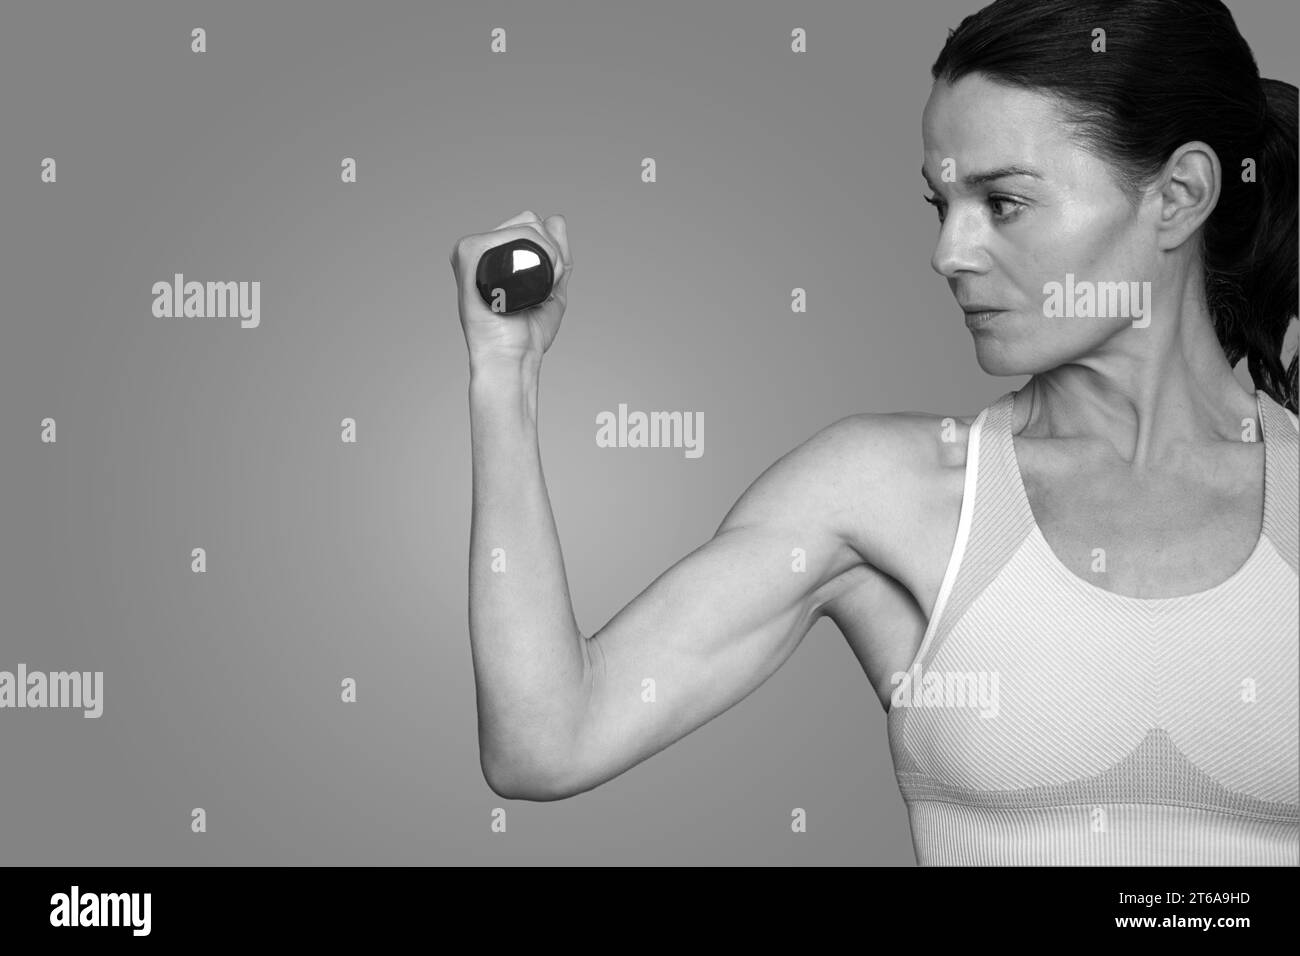 fit woman using a hand weight dumbell, close up, black and white. Stock Photo